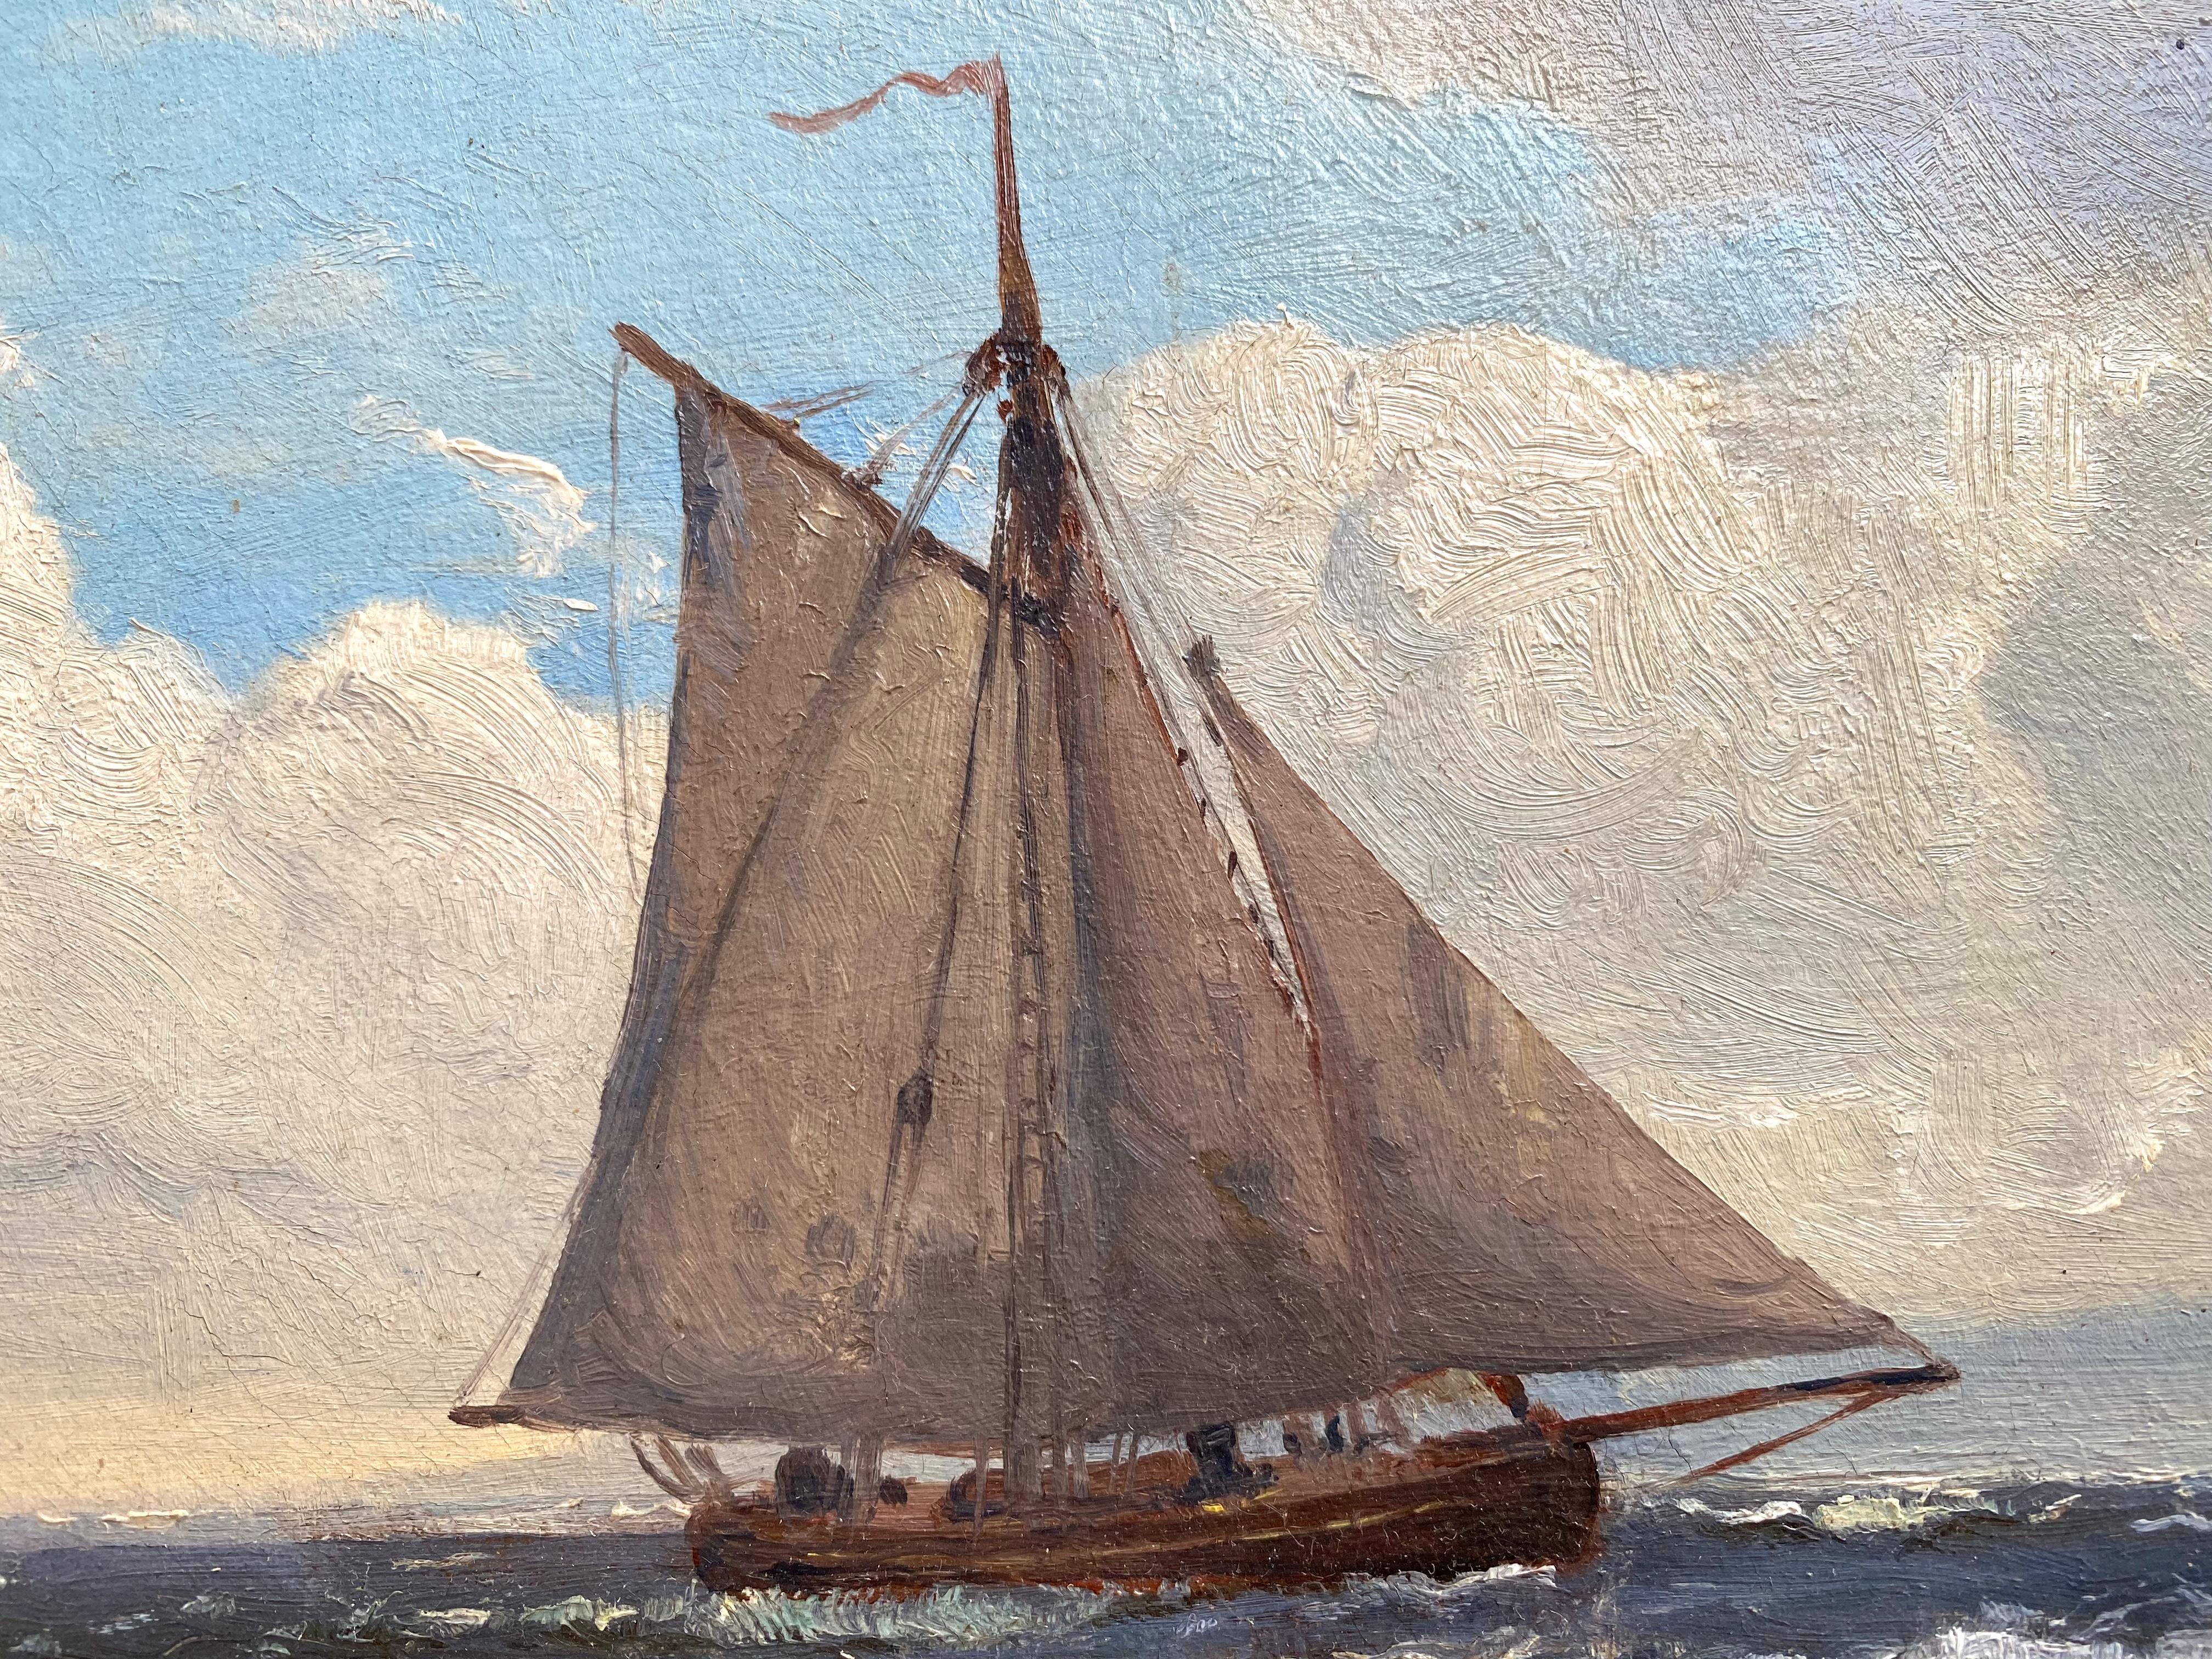 Here for your consideration is a fine example of the work of the famous Danish marine painter, Carl Frederick Sorensen. Oil on canvas in original unlined condition with it's original gold leaf frame. The painting is signed lower right and dated